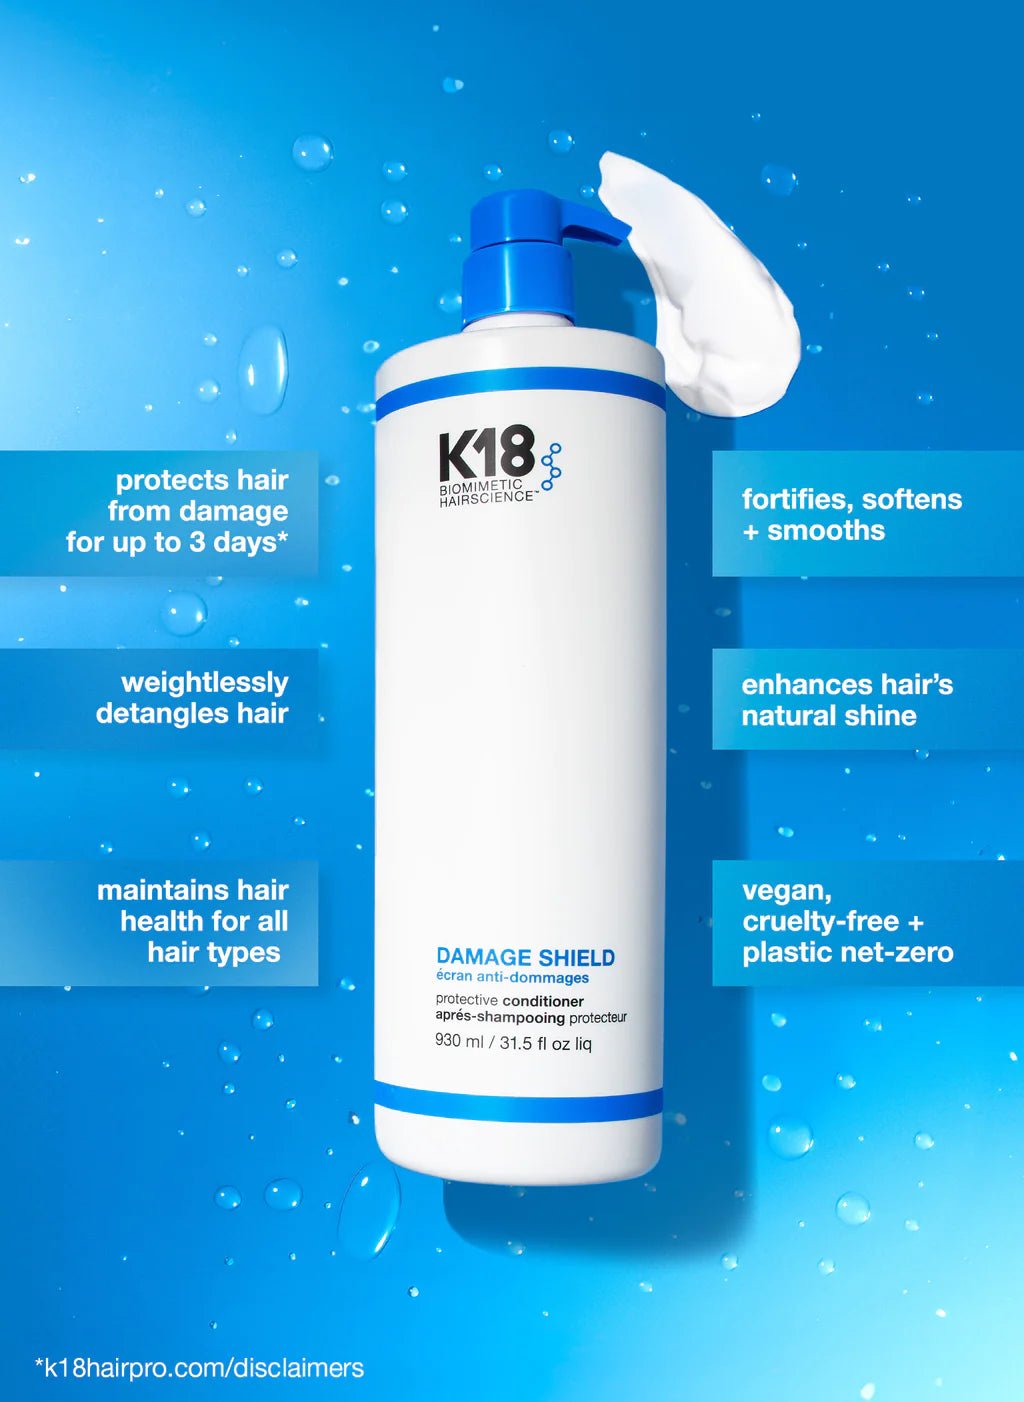 A bottle of K18 Damage Shield pH Protective Conditioner by K18 Hair Repair product against a blue background with text highlighting features like hair damage protection, being a nourishing conditioner that is vegan and cruelty-free, and benefits for detangling and enhancing natural shine.